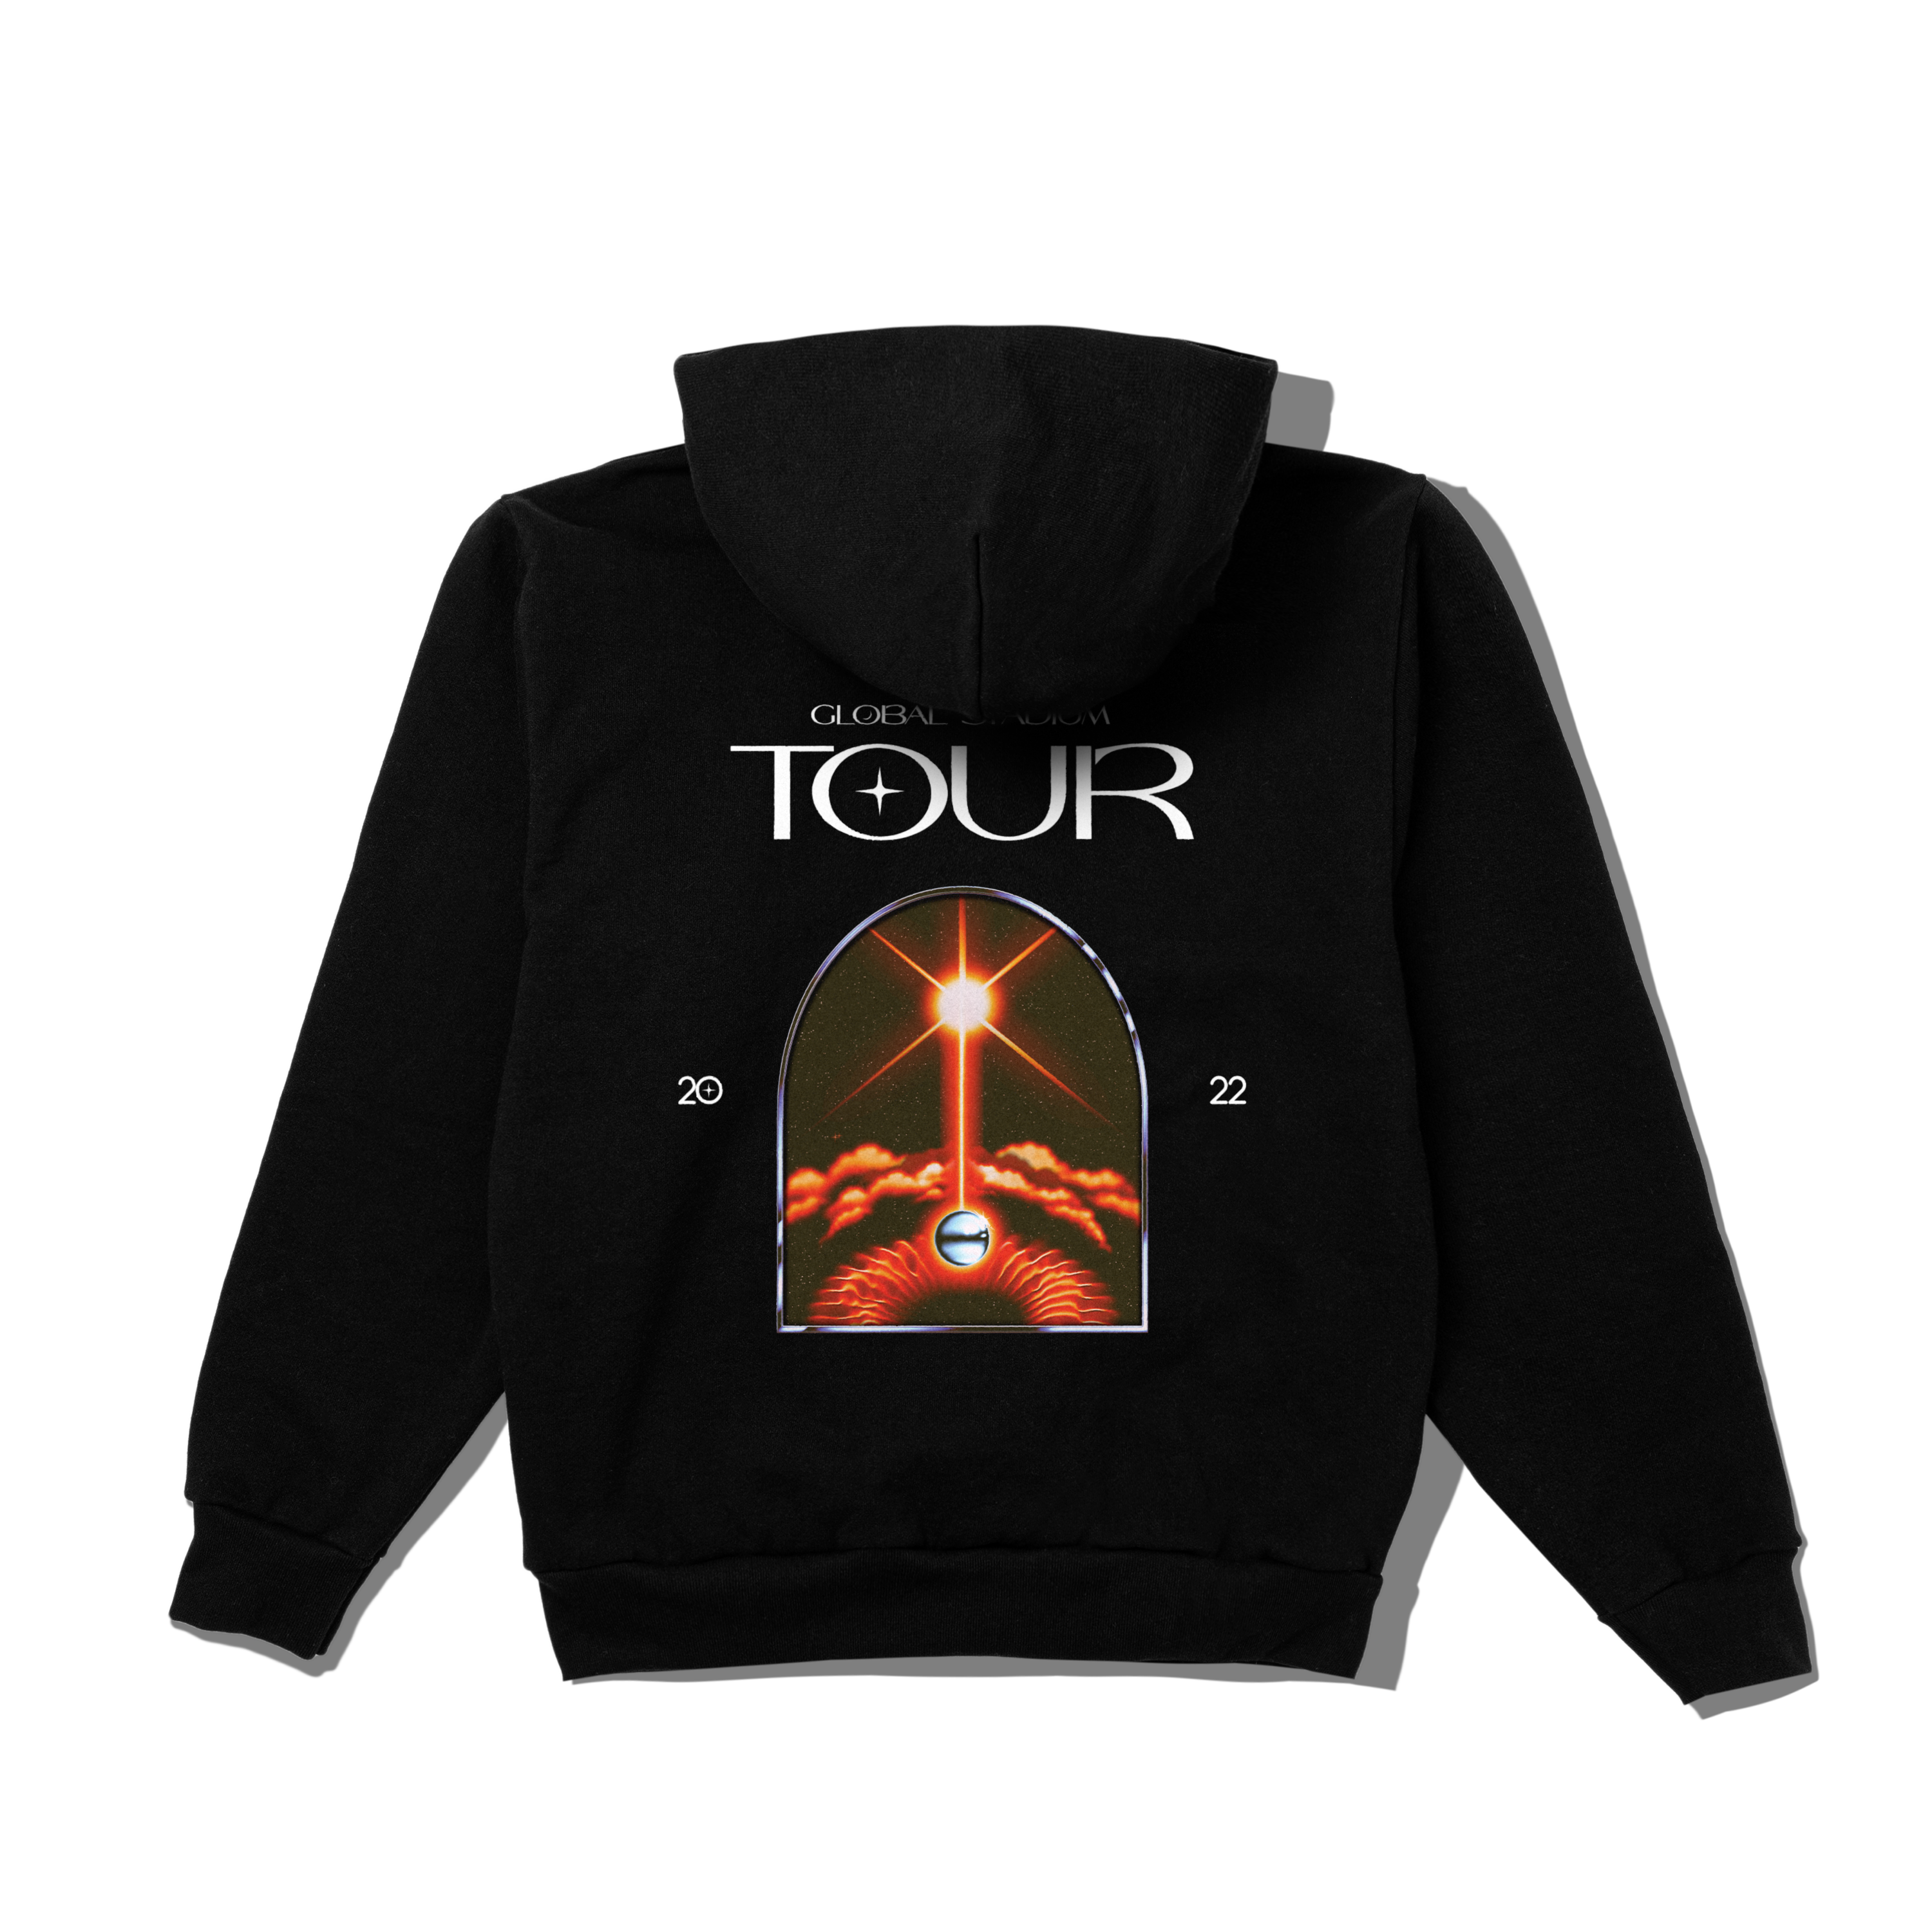 AHTD TOUR MERCH PRODUCT SHOTS ASTRAL HOODIE BACK 1 - The Weeknd Store